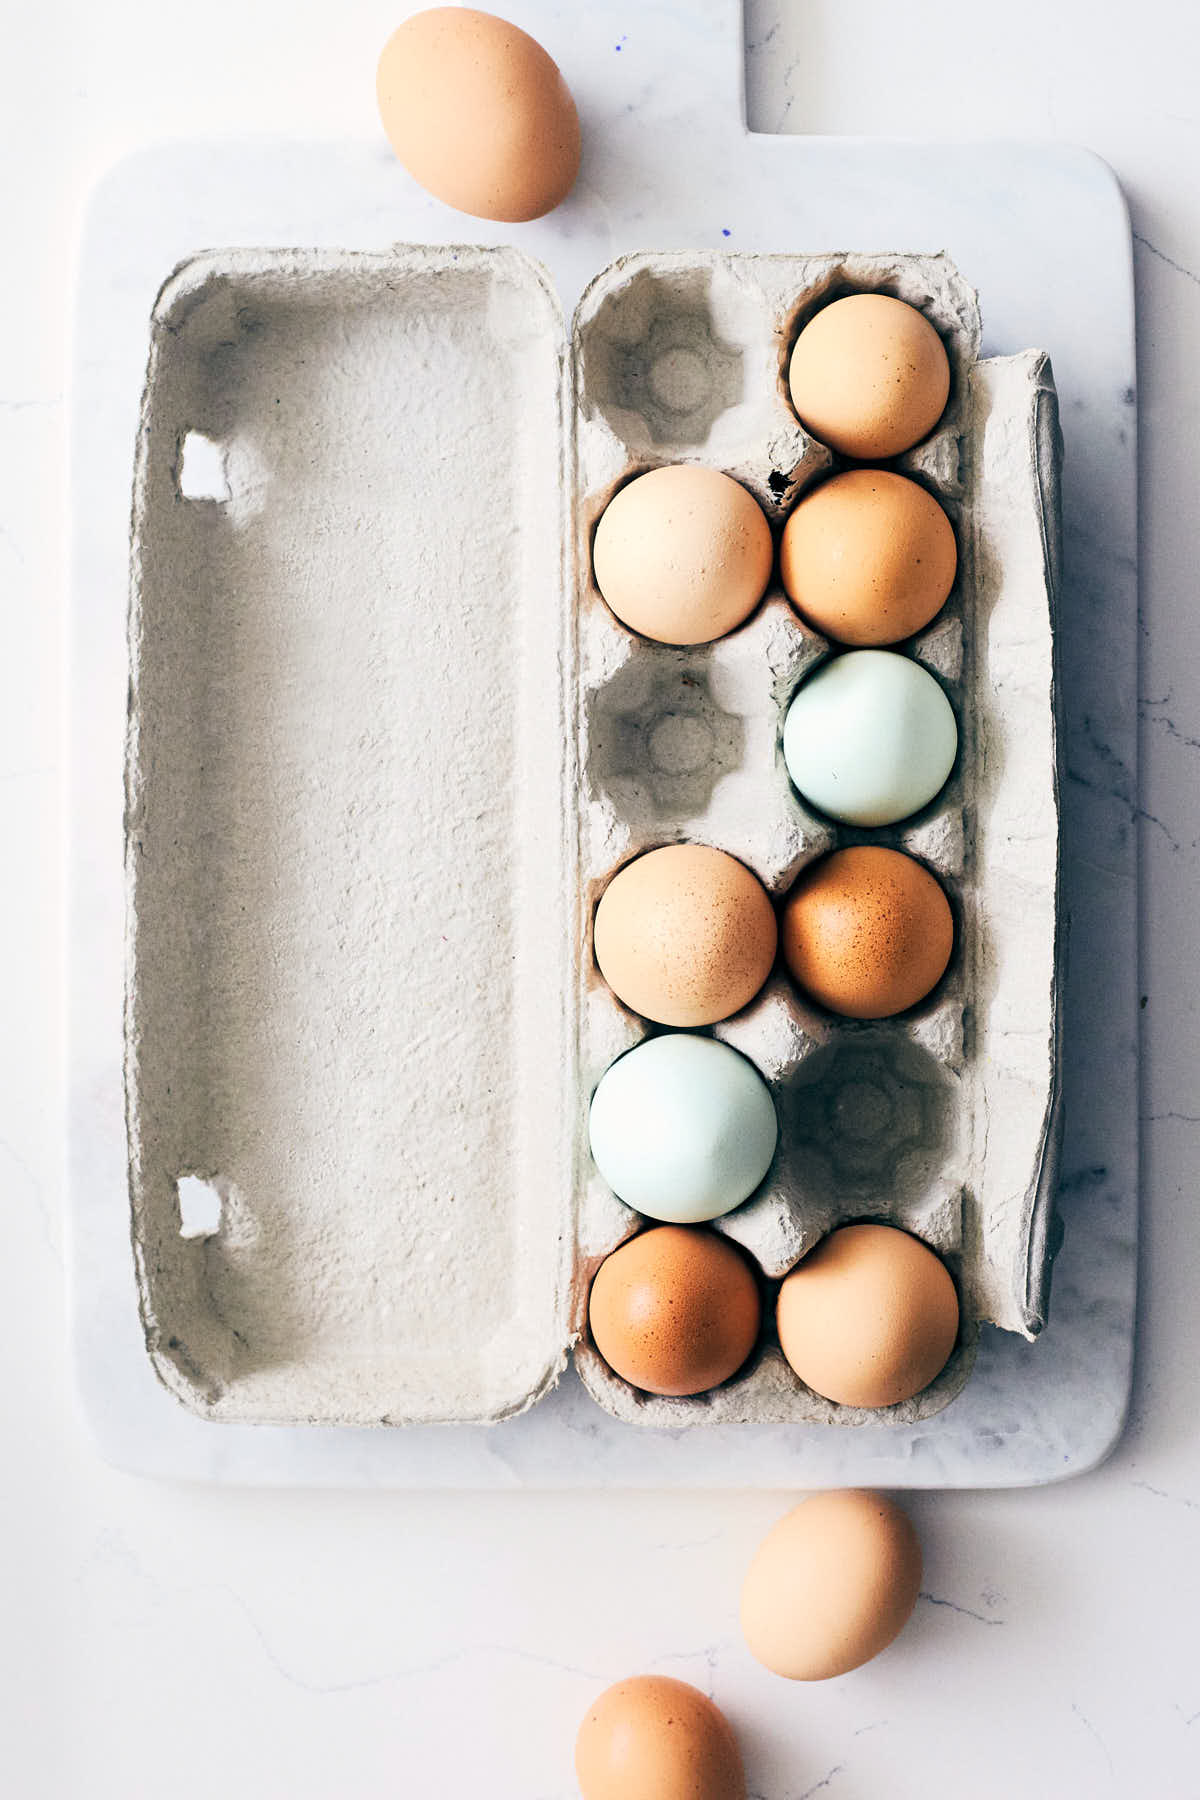 Eggs on a marble counter